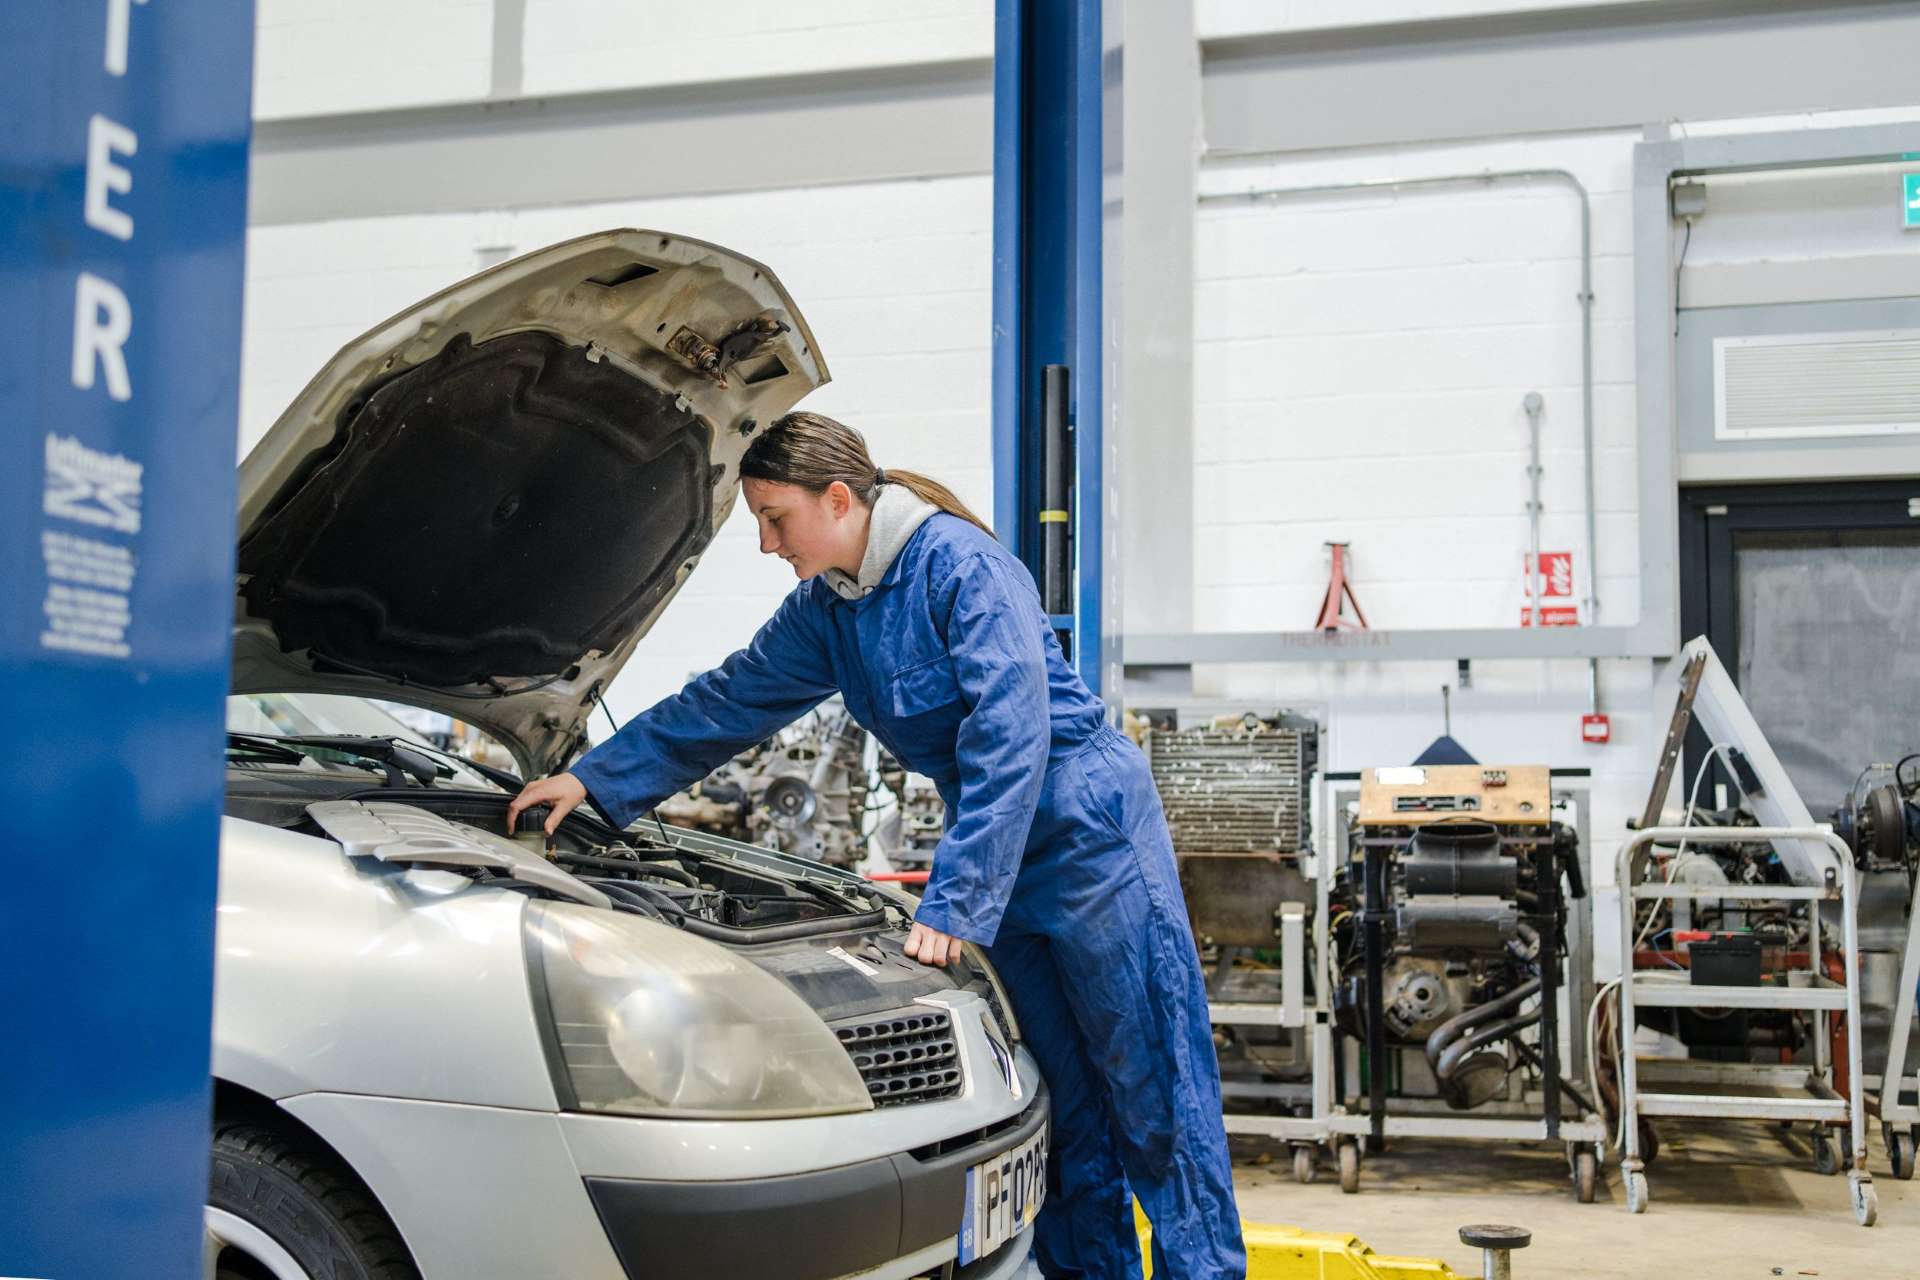 Harrogate College student checking the engine bay of a car